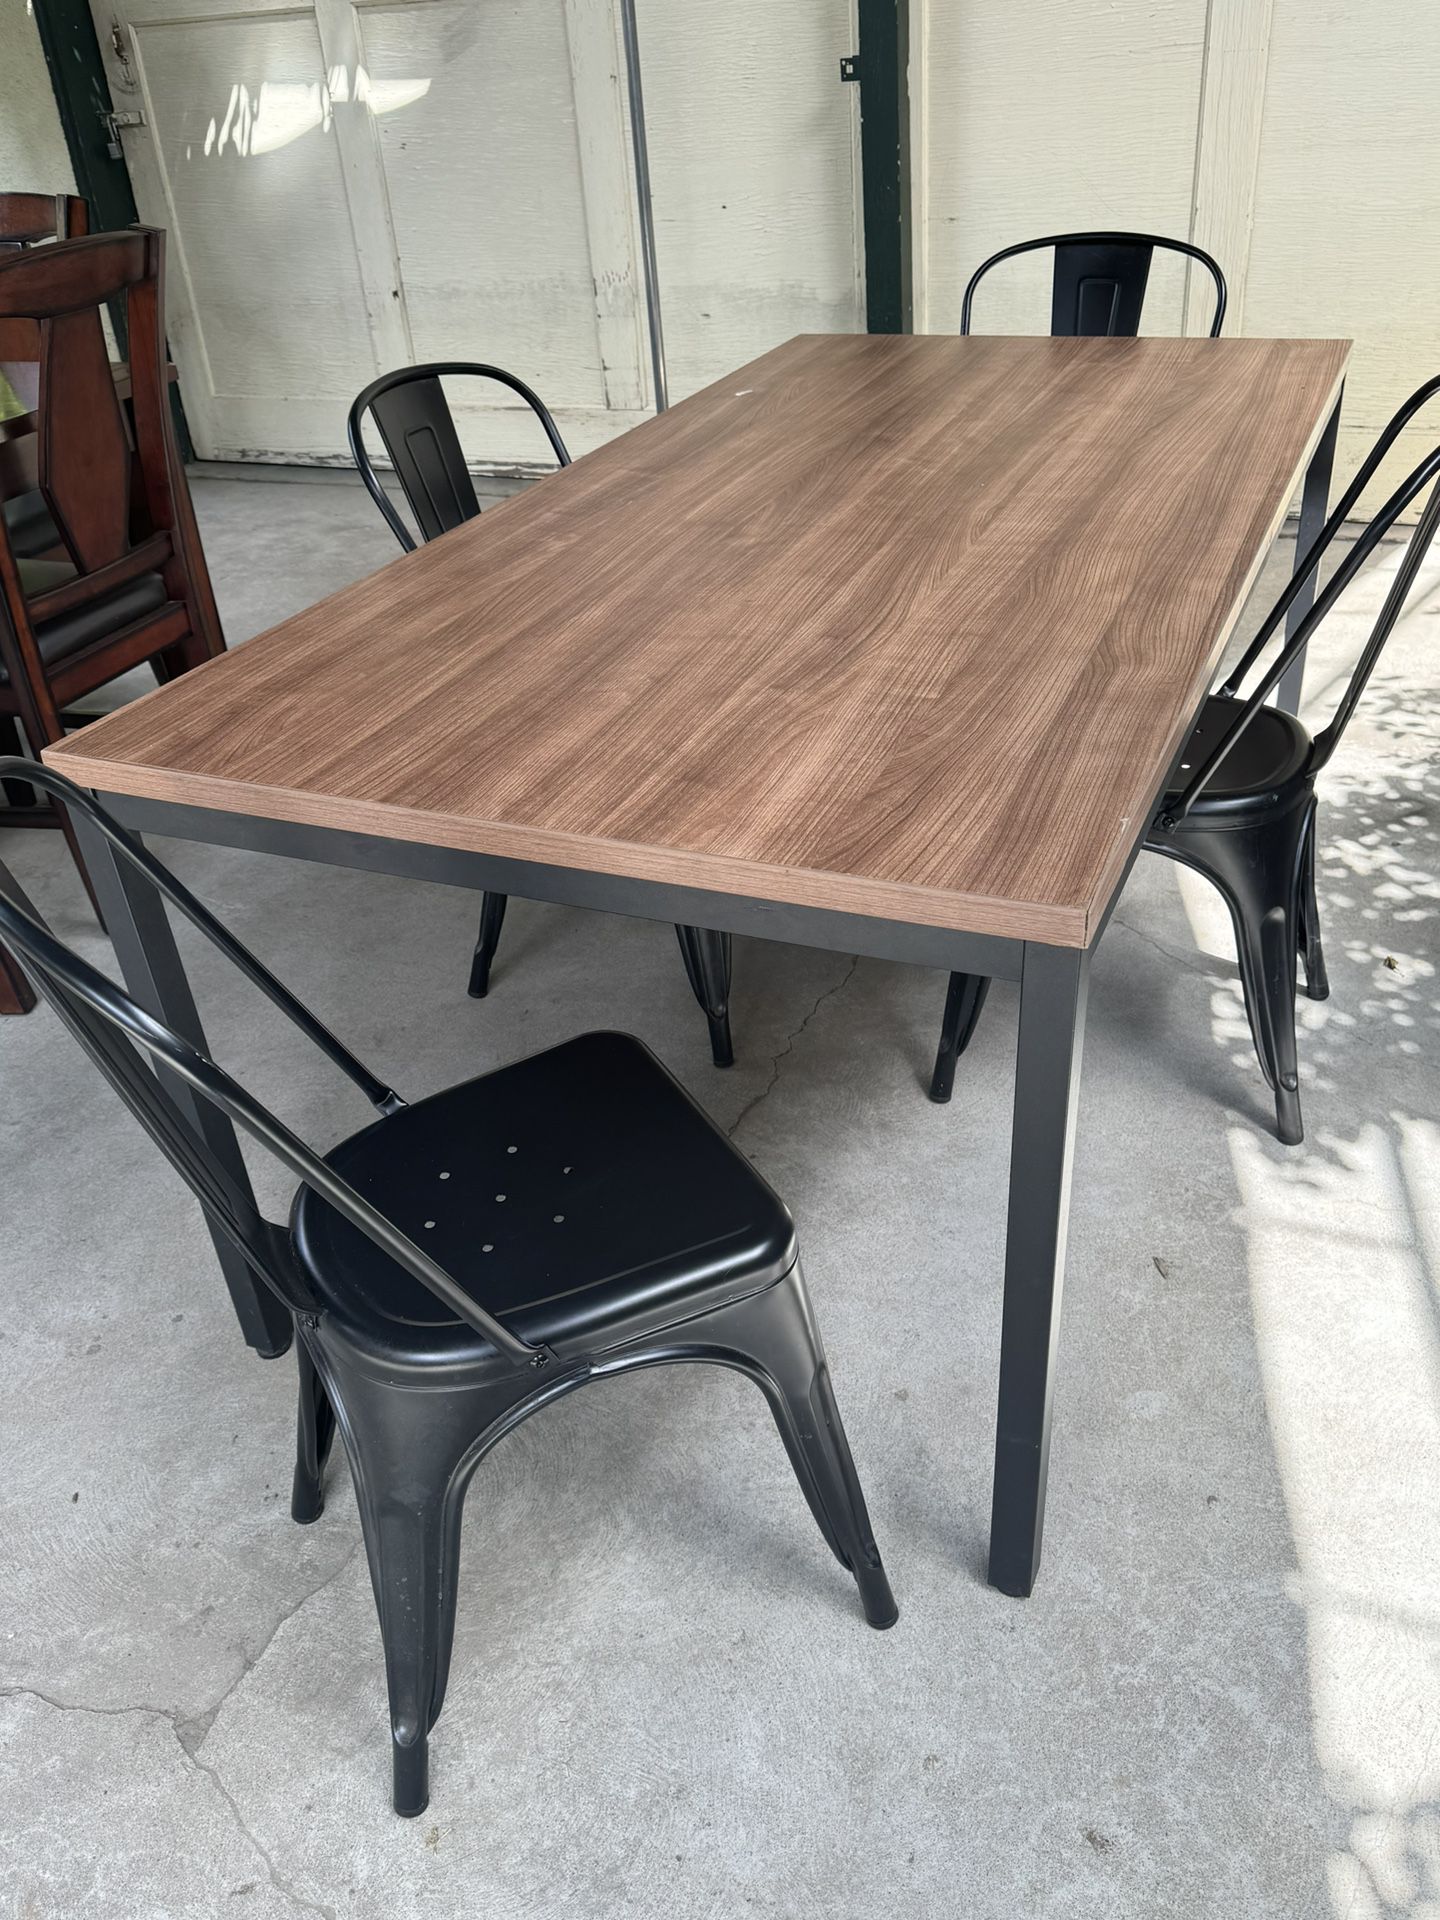 DINING TABLE WITH CHAIRS 